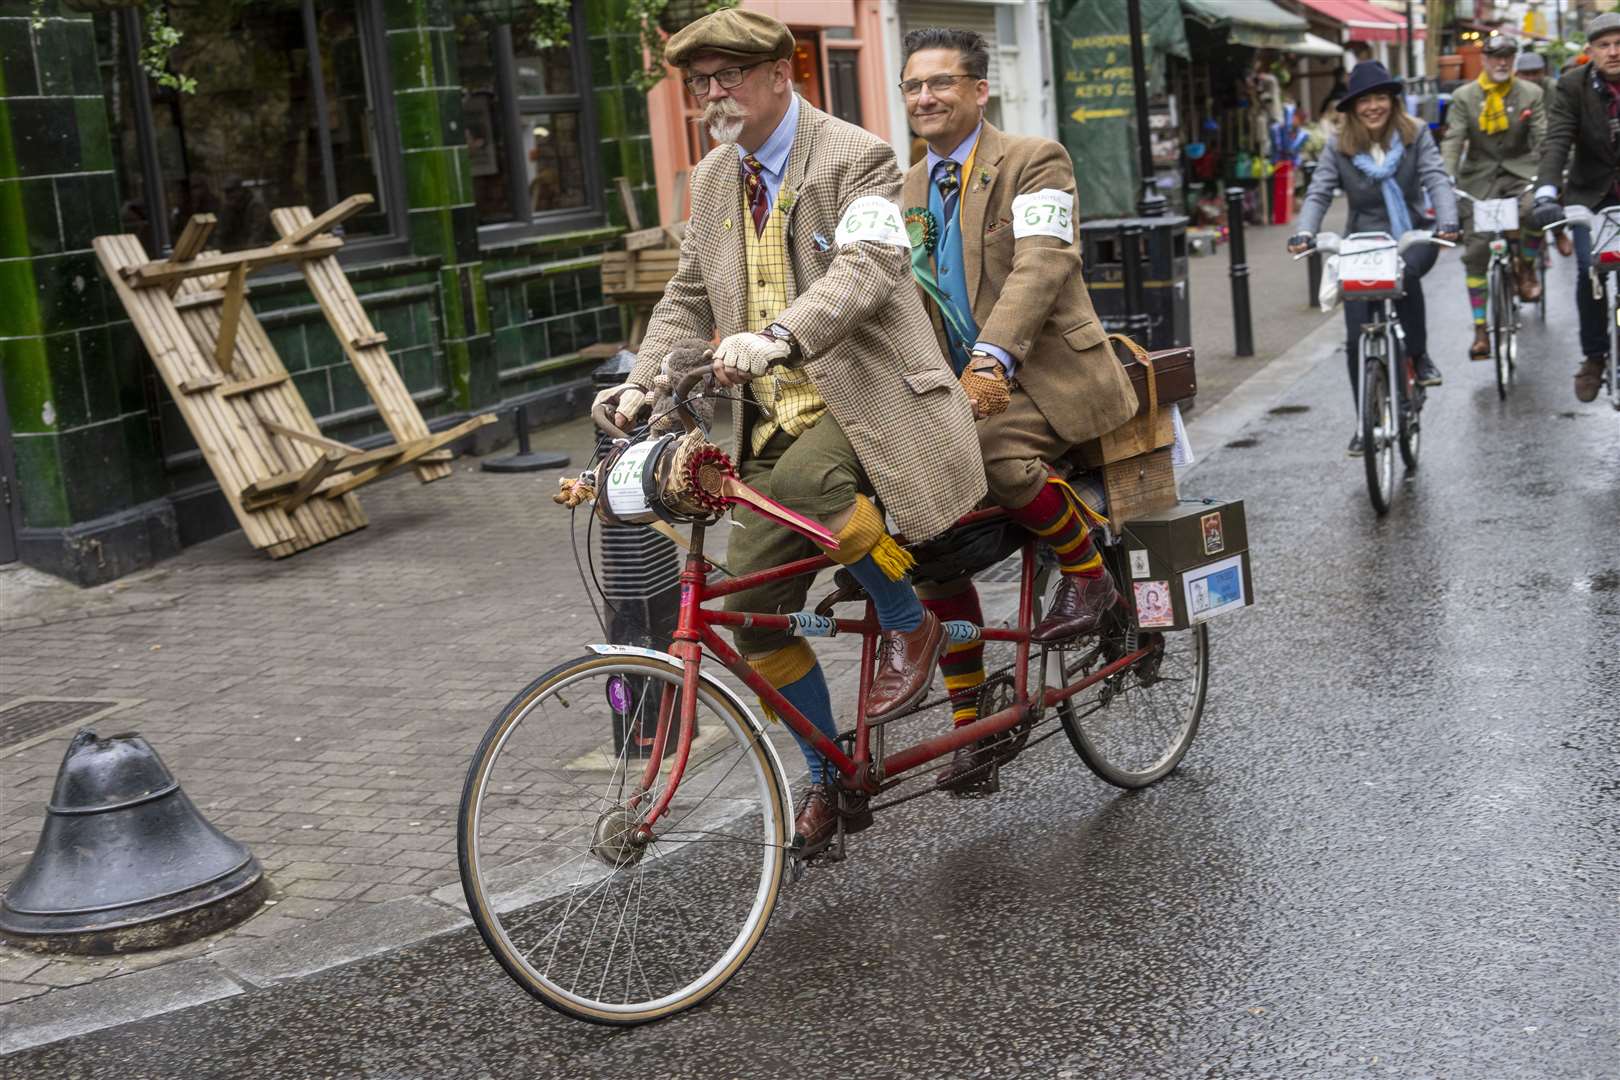 A bicycle made for two (Jeff Moore/PA)